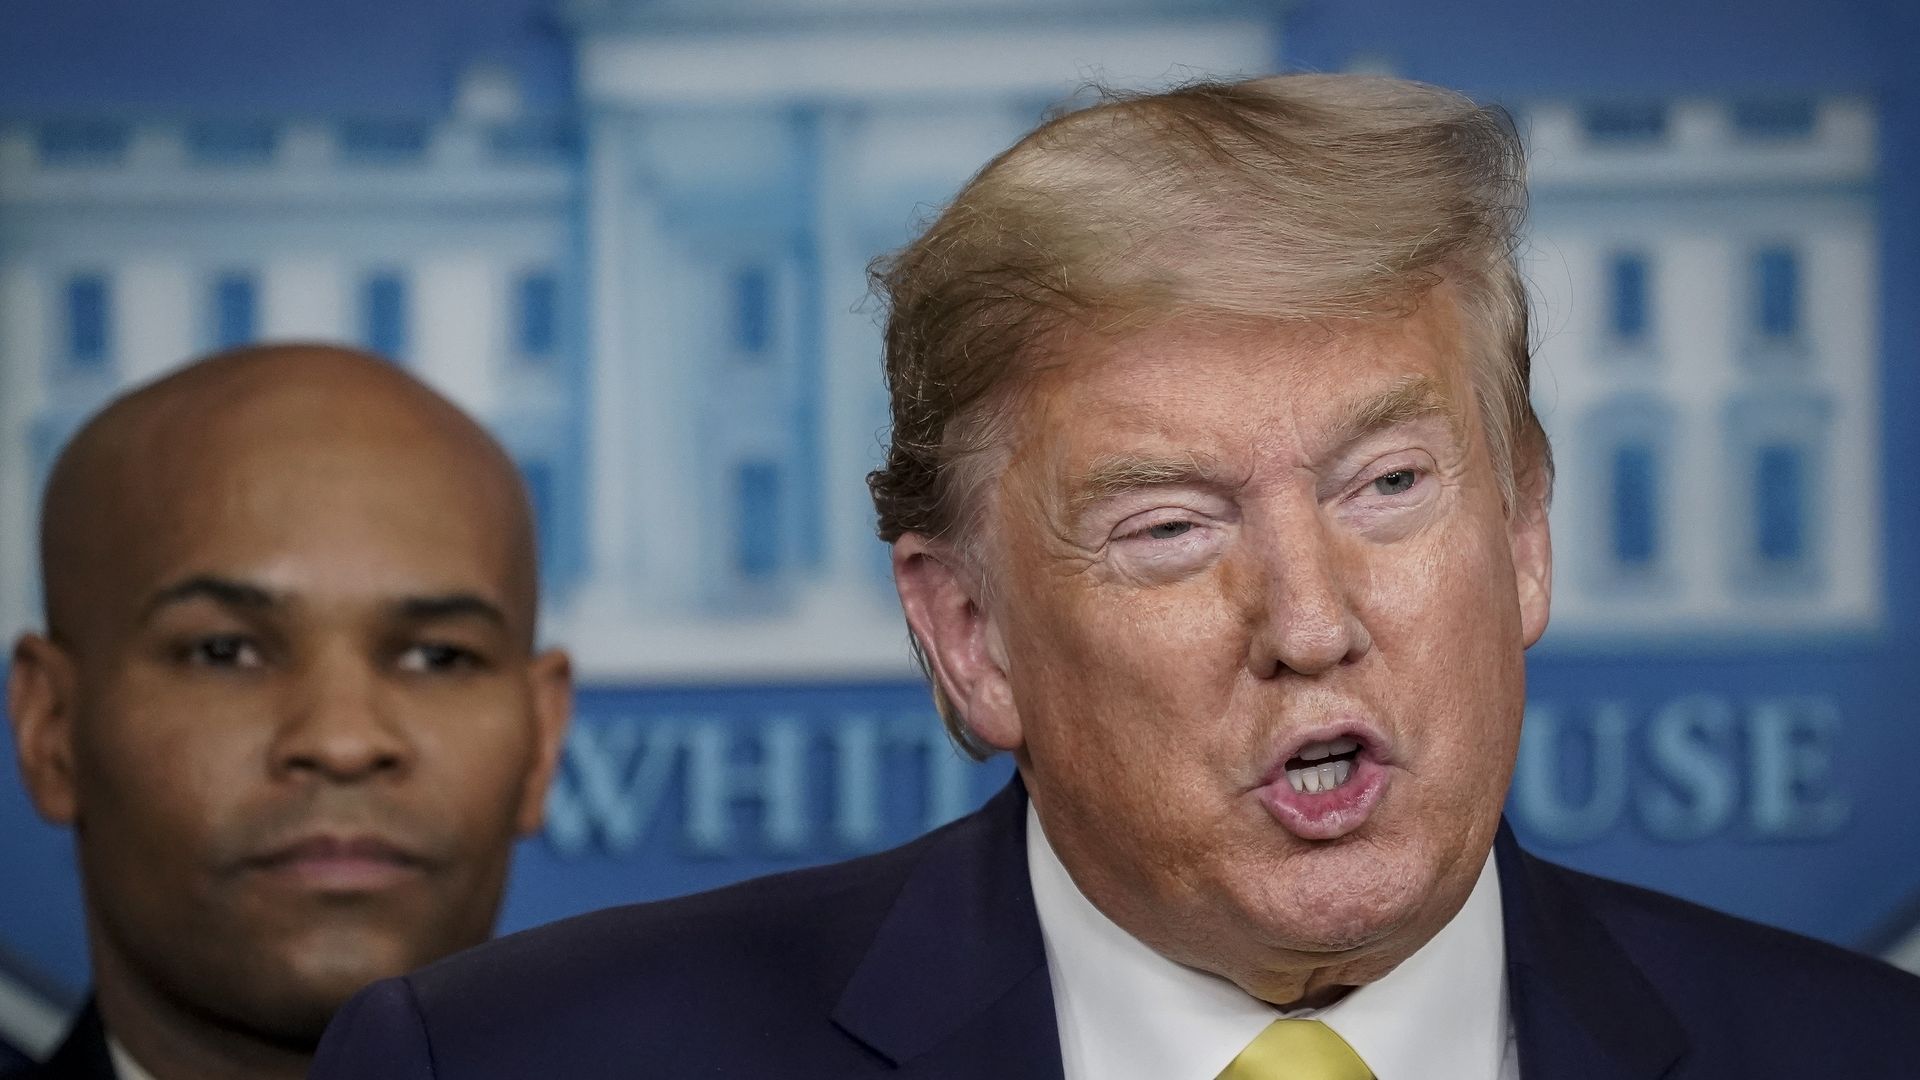 U.S. Surgeon General Dr. Jerome Adams looks on as U.S. President Donald Trump speaks during a press briefing with members of the White House Coronavirus Task Force team